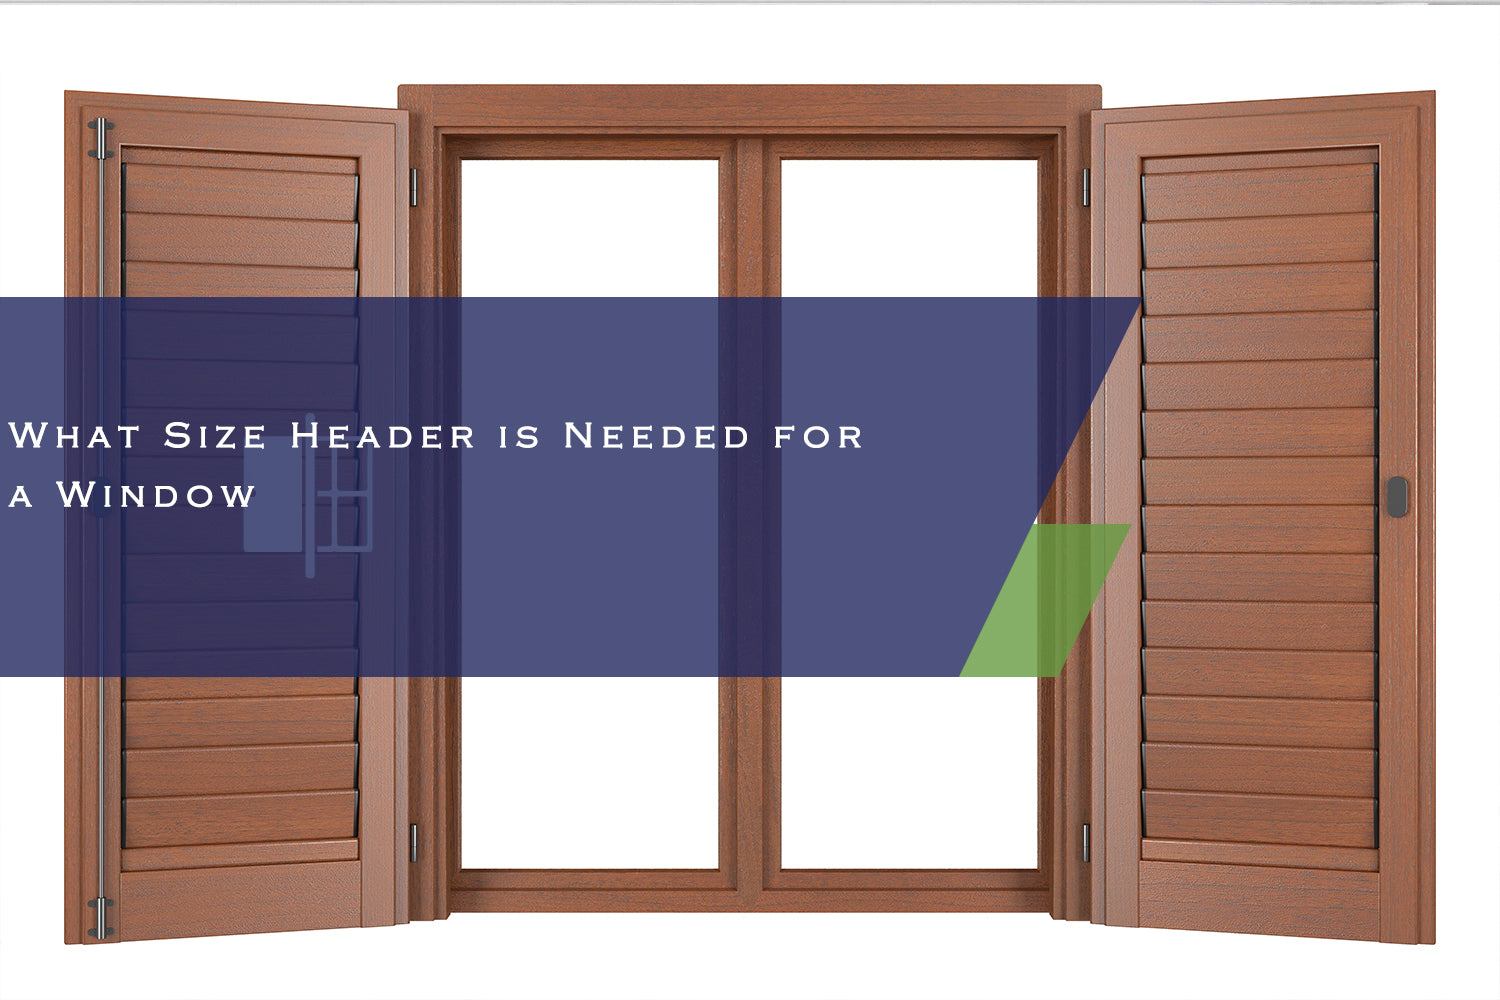 What Size Header is Needed for a Window